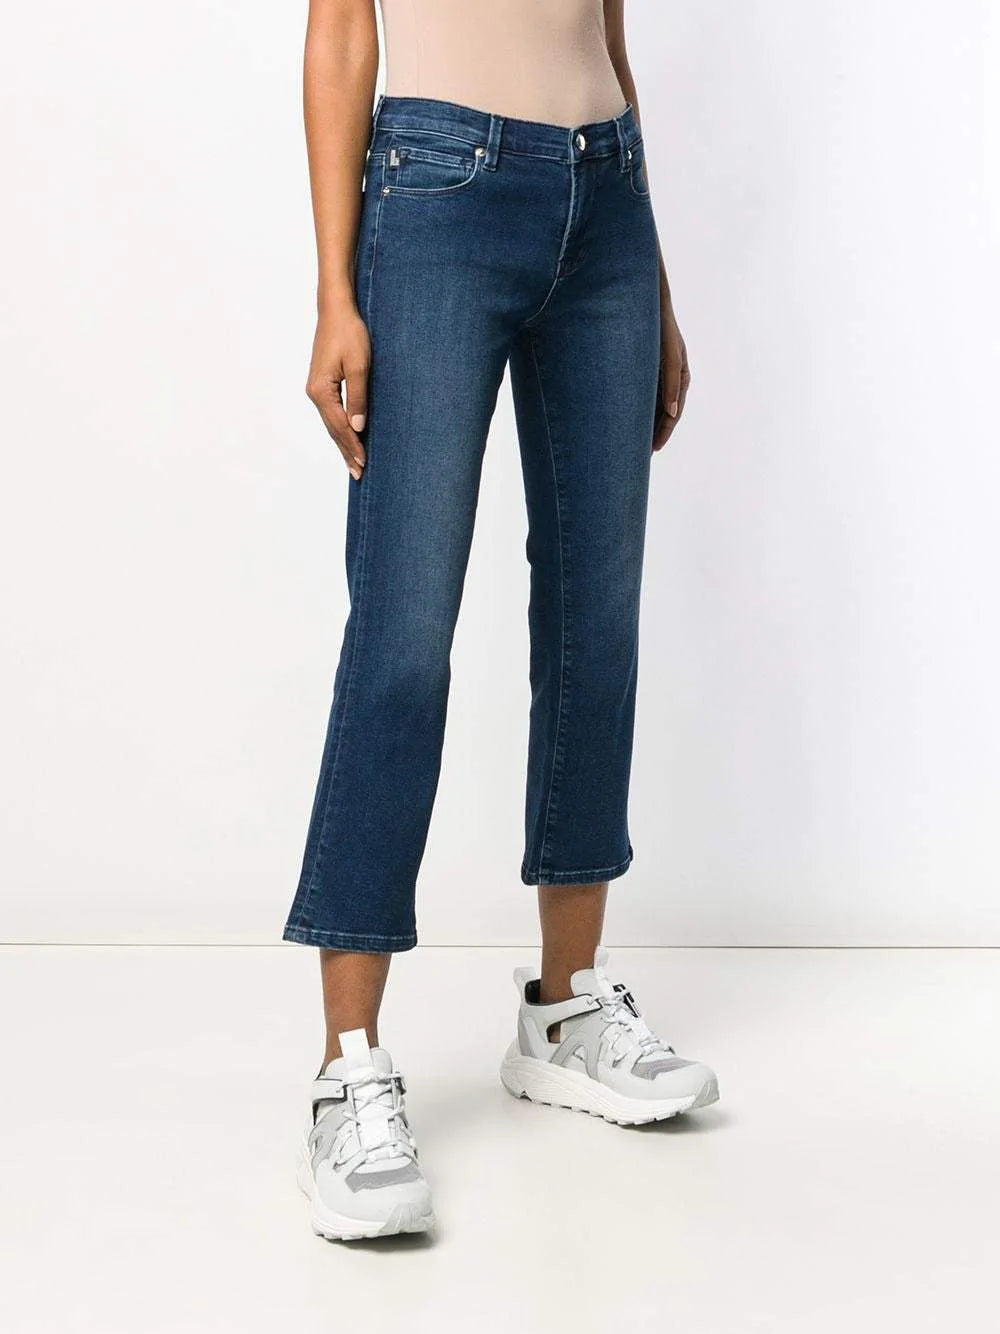 Love Moschino Blue Cotton Jeans & Pant Blue, feed-agegroup-adult, feed-color-Blue, feed-gender-female, Jeans & Pants - Women - Clothing, Love Moschino, W29 | IT43 at SEYMAYKA